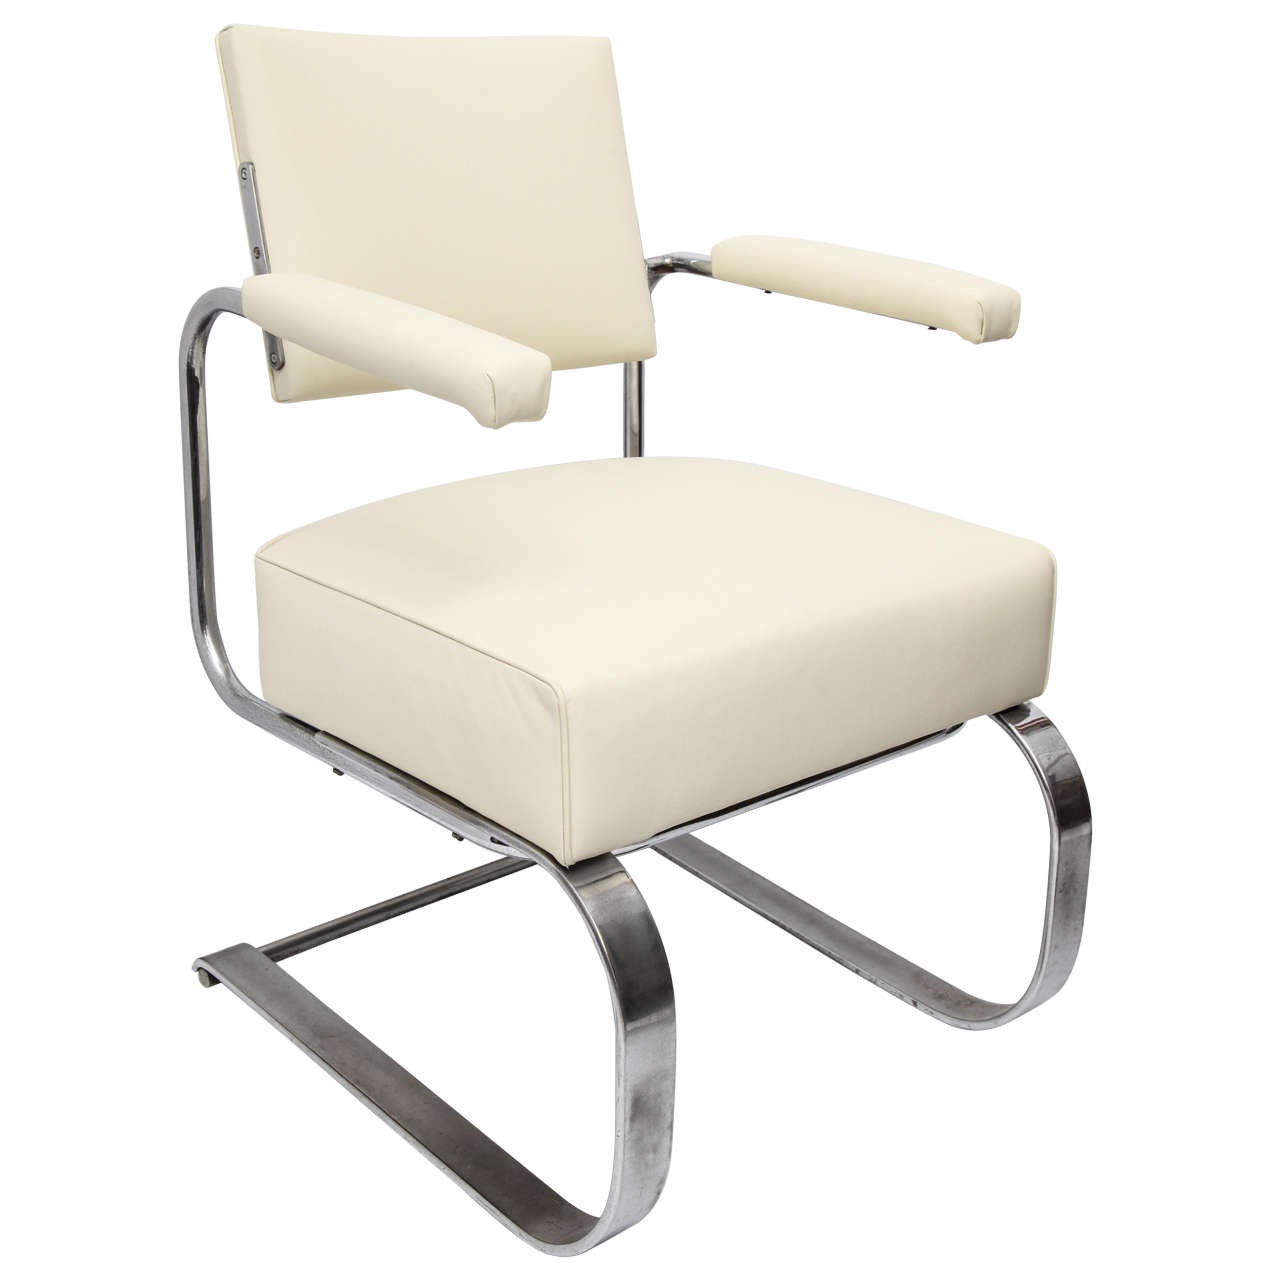 Gilbert Rohde Lounge Chair Art Deco Machine Age, 1930s For Sale